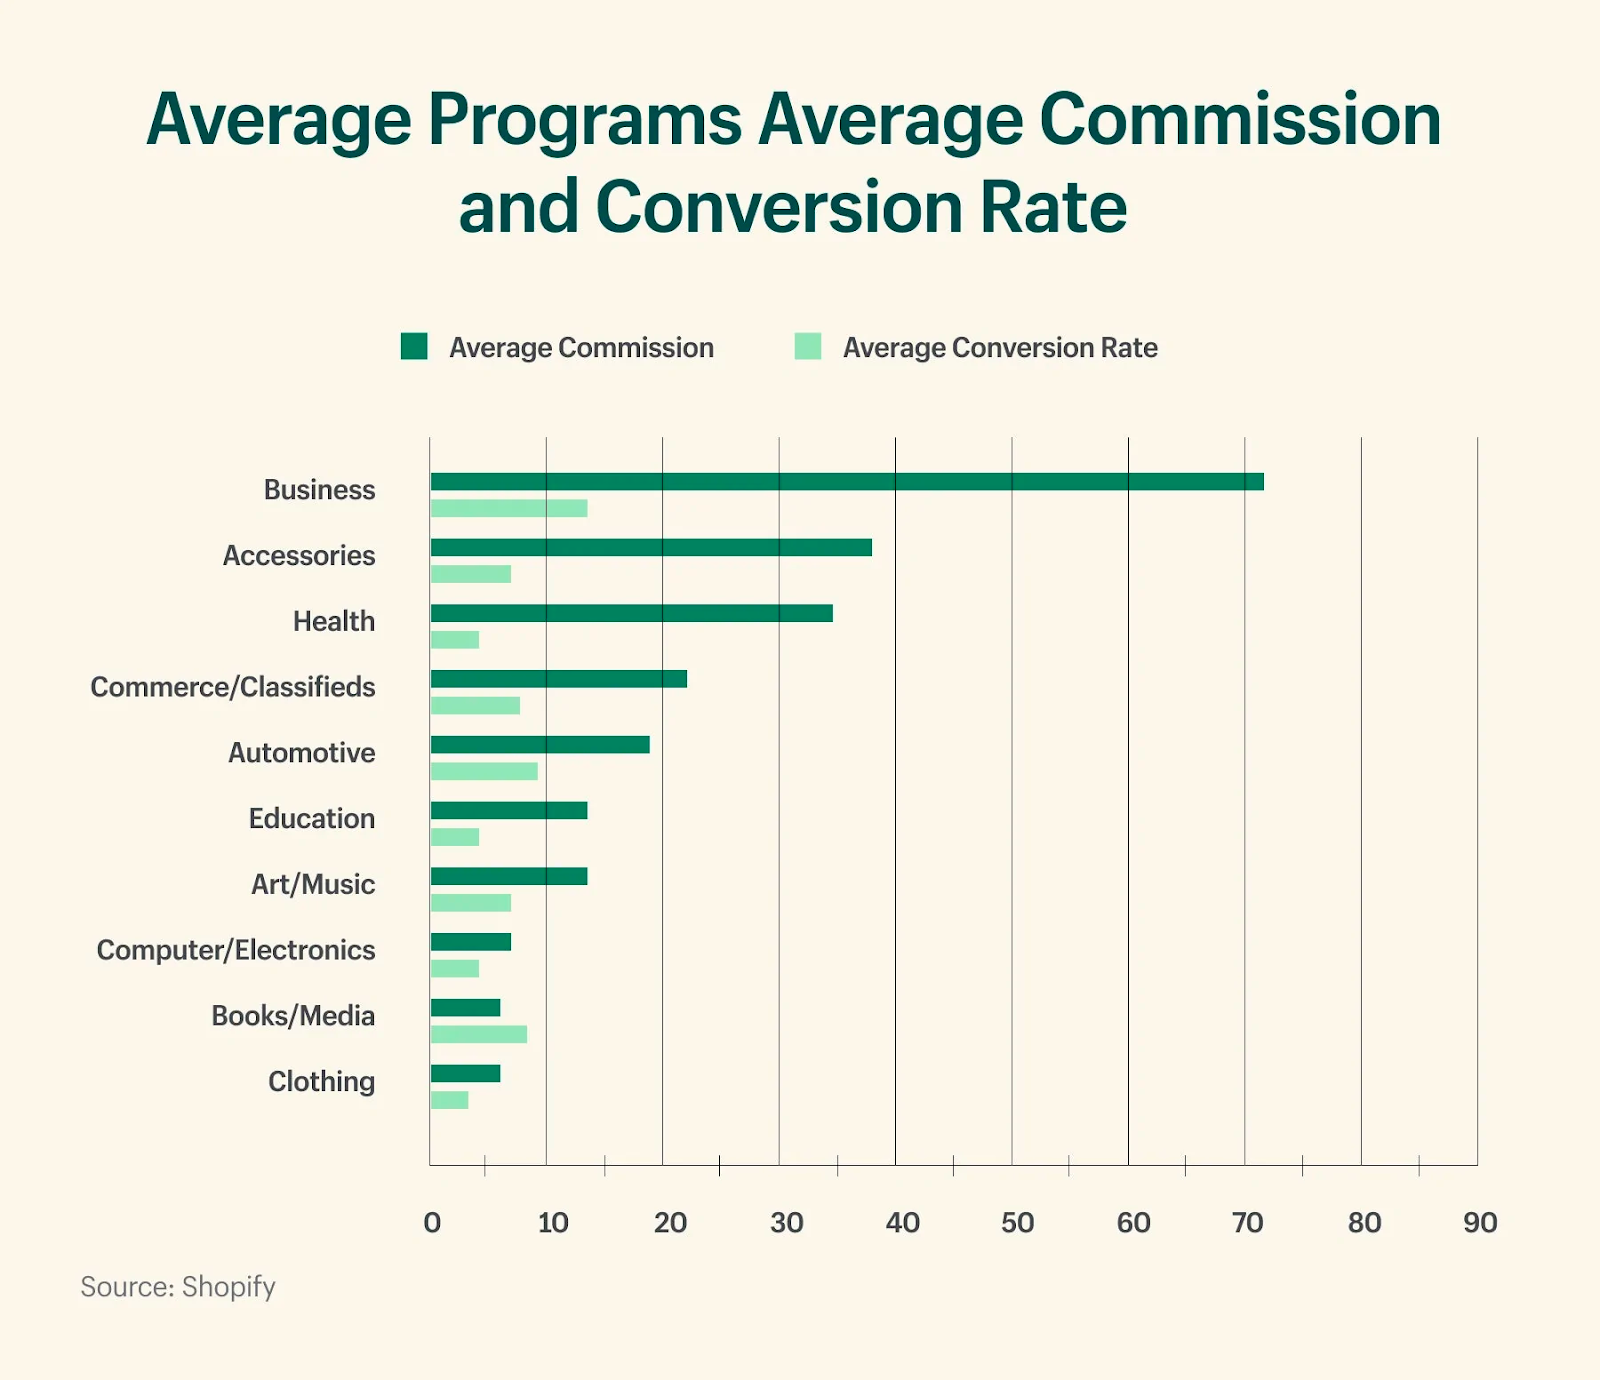 Average programs average commission and conversion rate graph.